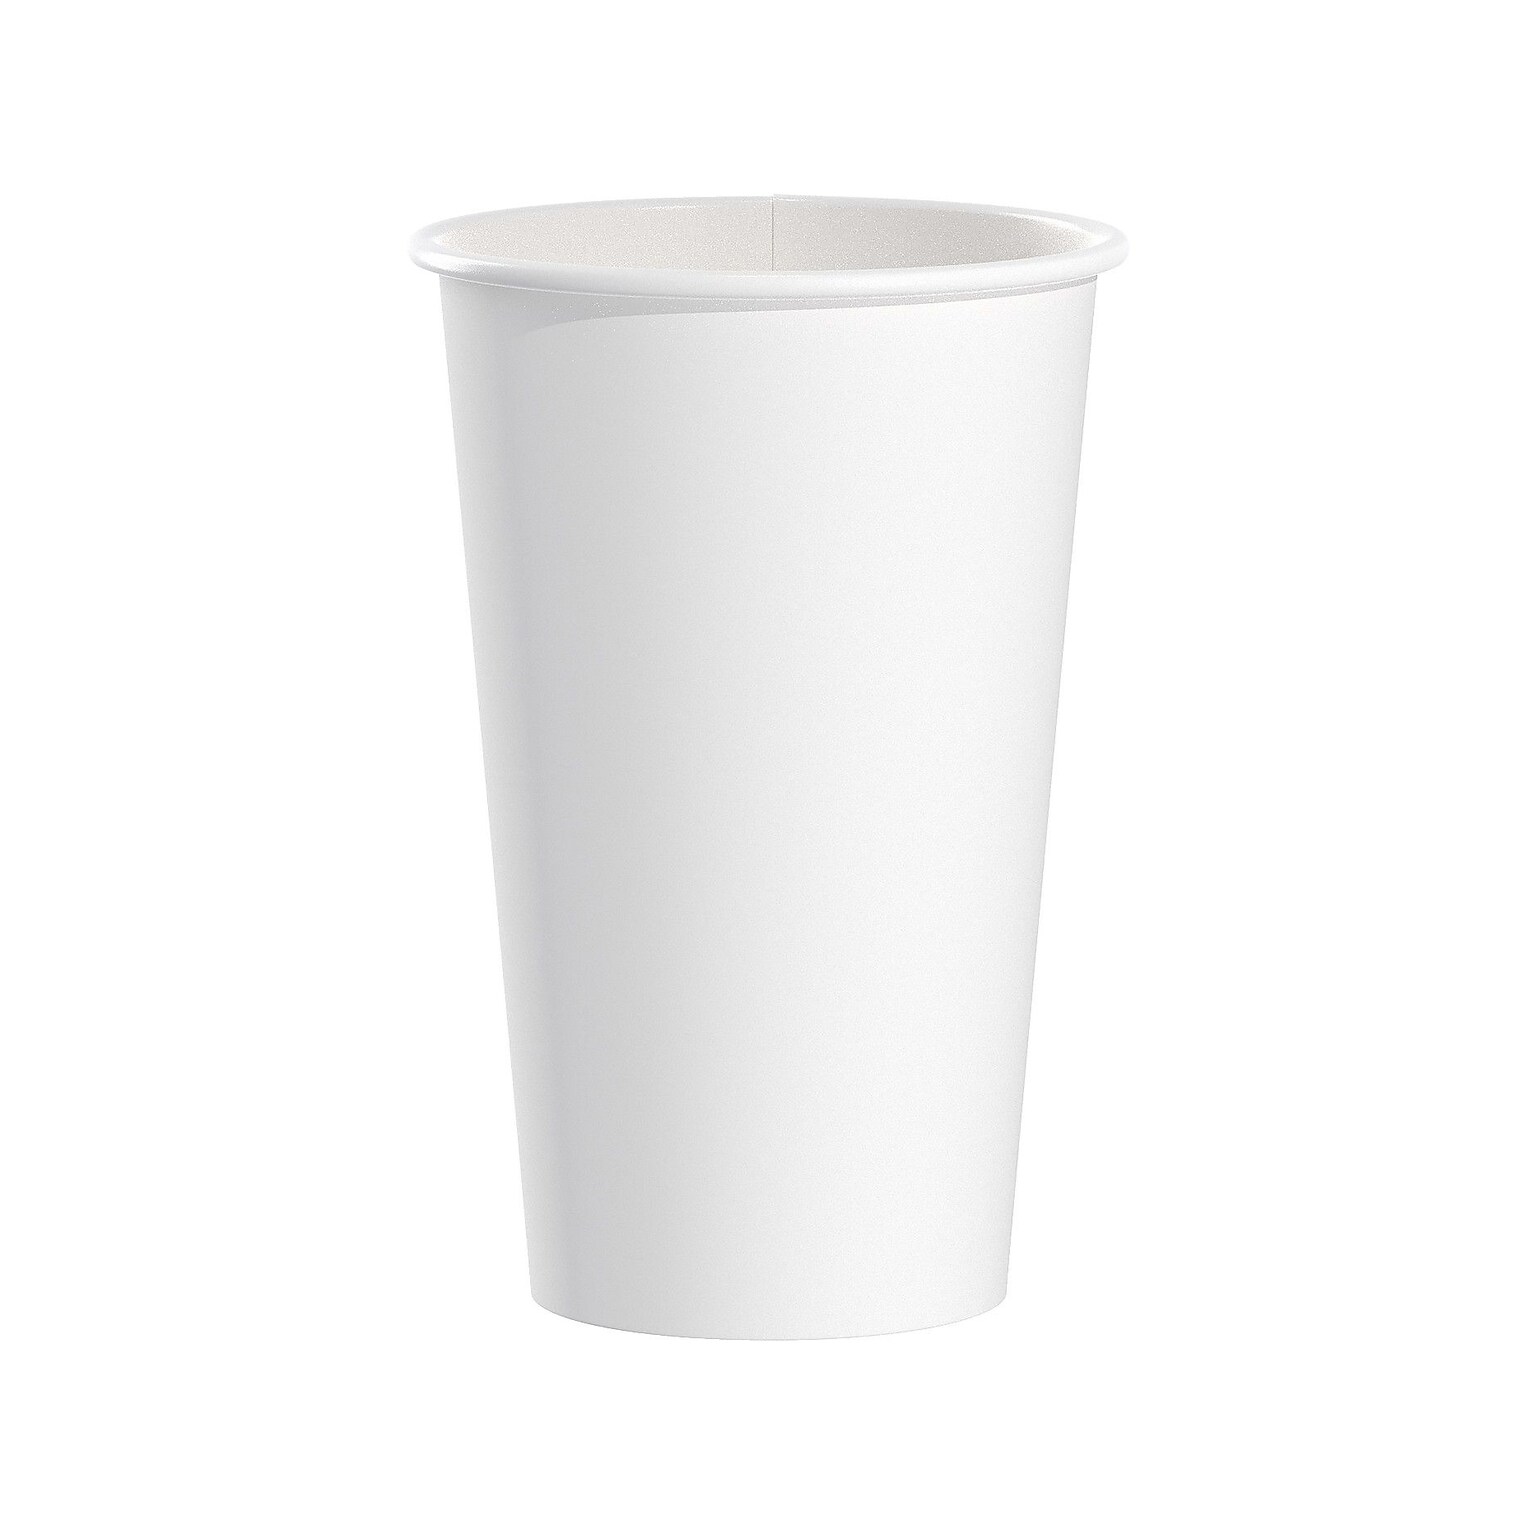 Solo Paper Hot Cup, 16 Oz., White, 50 Cups/Pack (316W-2050)